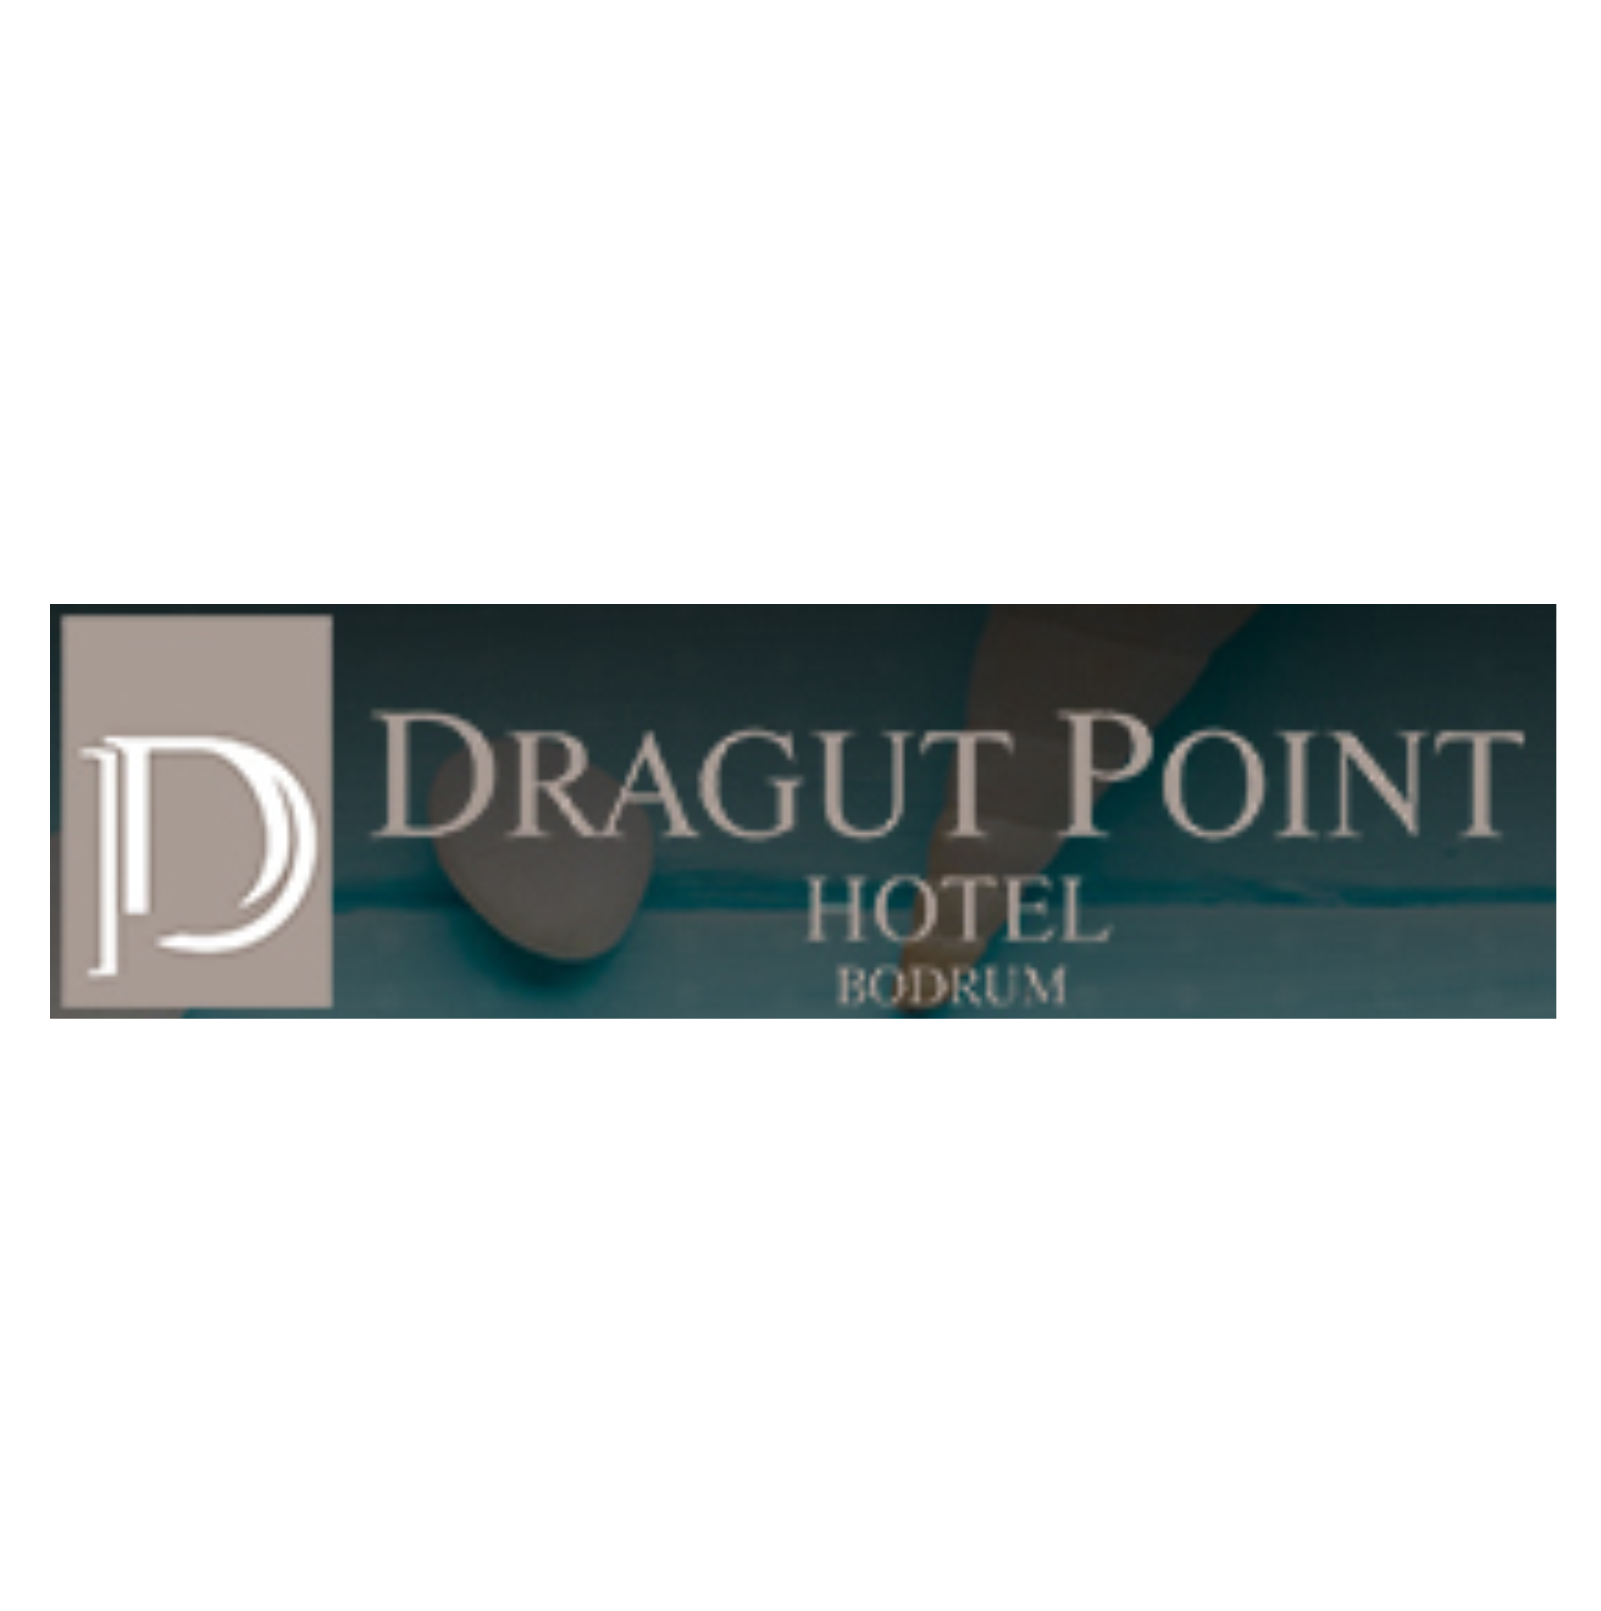 DRAGUT POINT SOUTH HOTEL